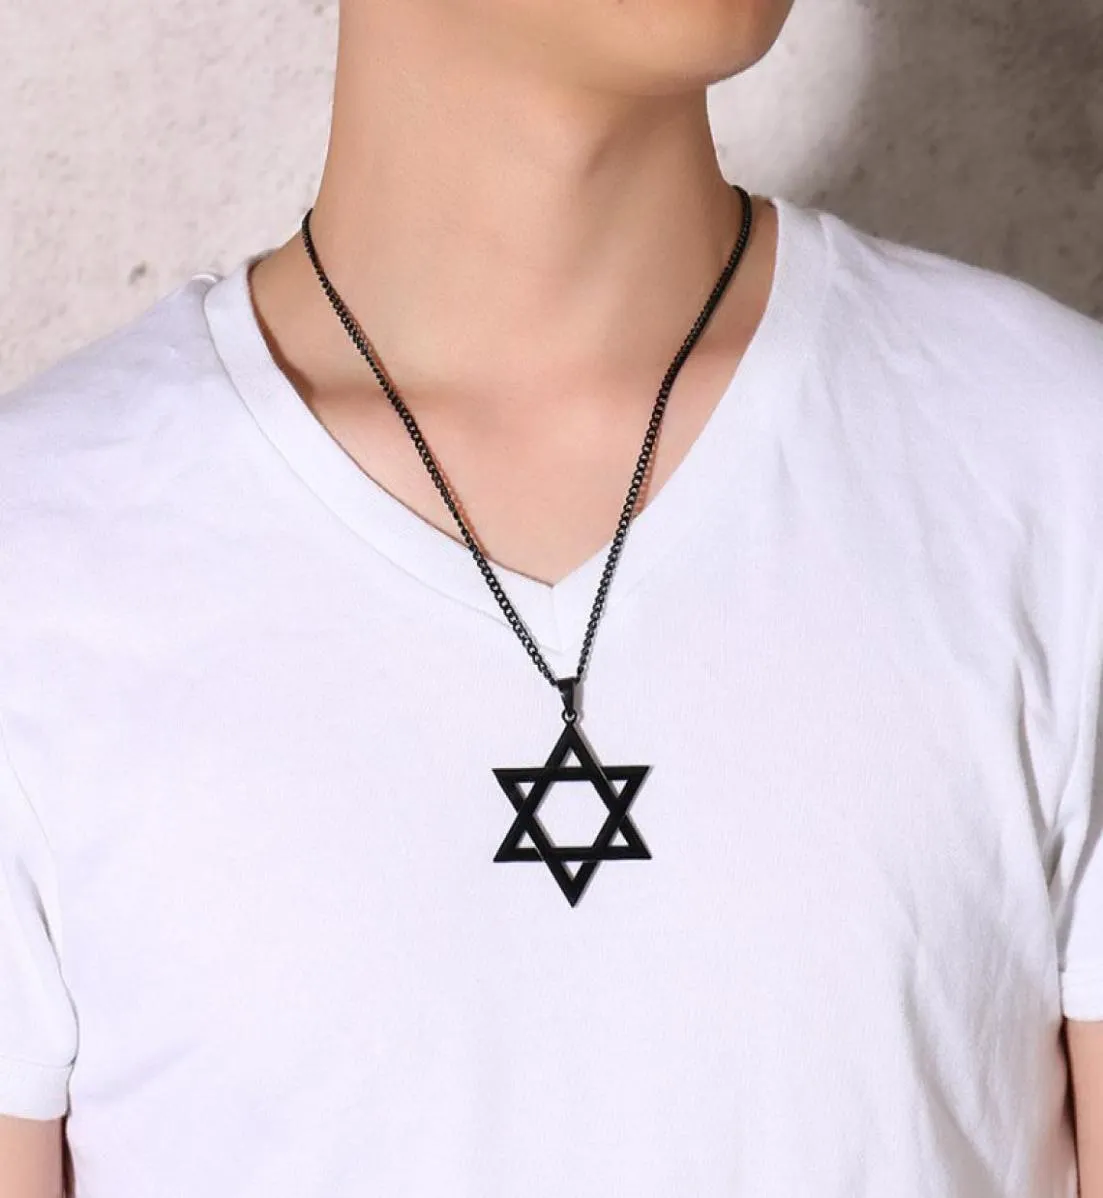 Pendant Necklaces 2021 Men Classic Star Of David Necklace In Black Gold Silver Color Stainless Steel Israel Jewish Jewelry9646891